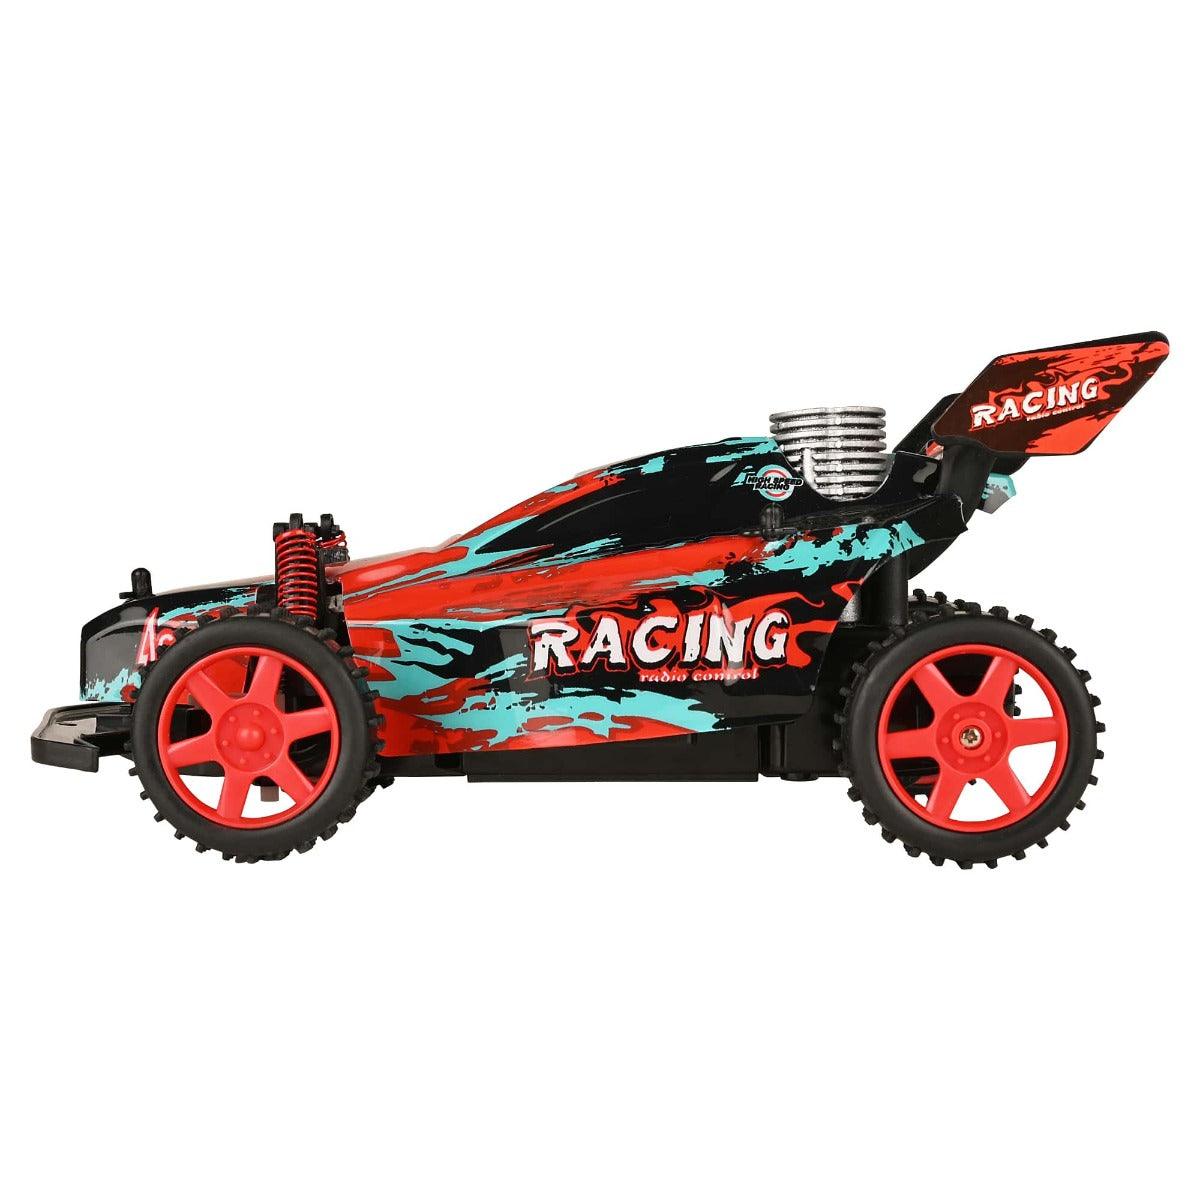 Playzu Buggy Alien 1:18 Scale R/C Car - Red for Ages 6+